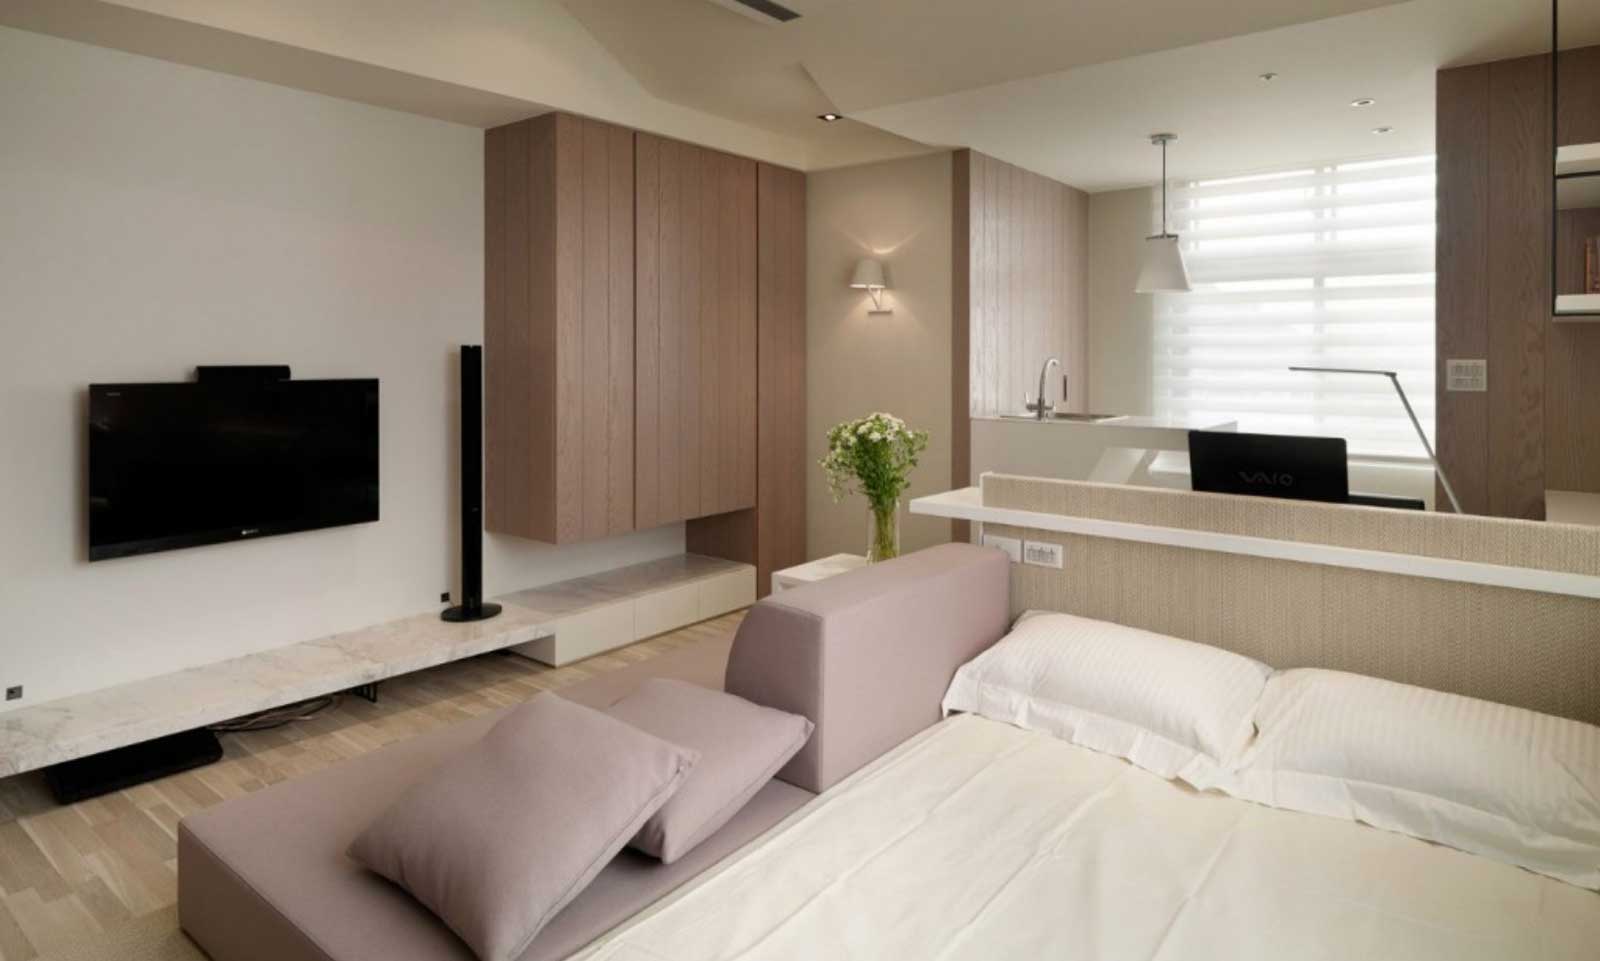 White Modern Design Amazing White Modern Themed Interior Design For Small Master Bedroom Apartment Ideas With Simple Black Shaped Wall Mounted TV Design And Rustic Striped Wood Cabinet Ideas Interior Design The Stylish And New Ideas Of Modern Interior Design